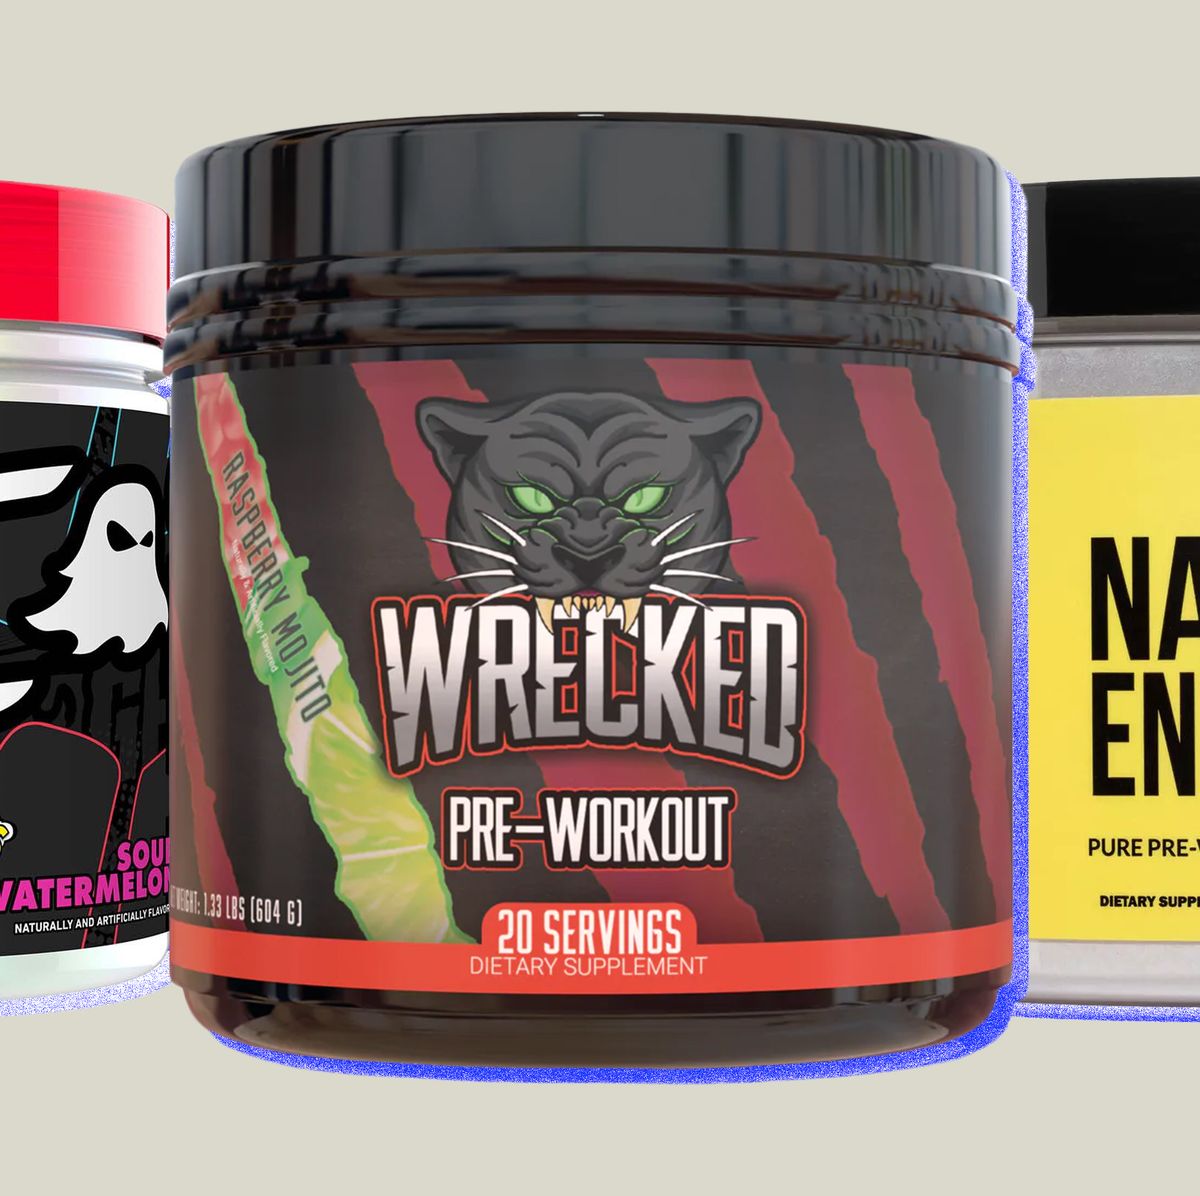 Rev for with the Best Pre-Workout